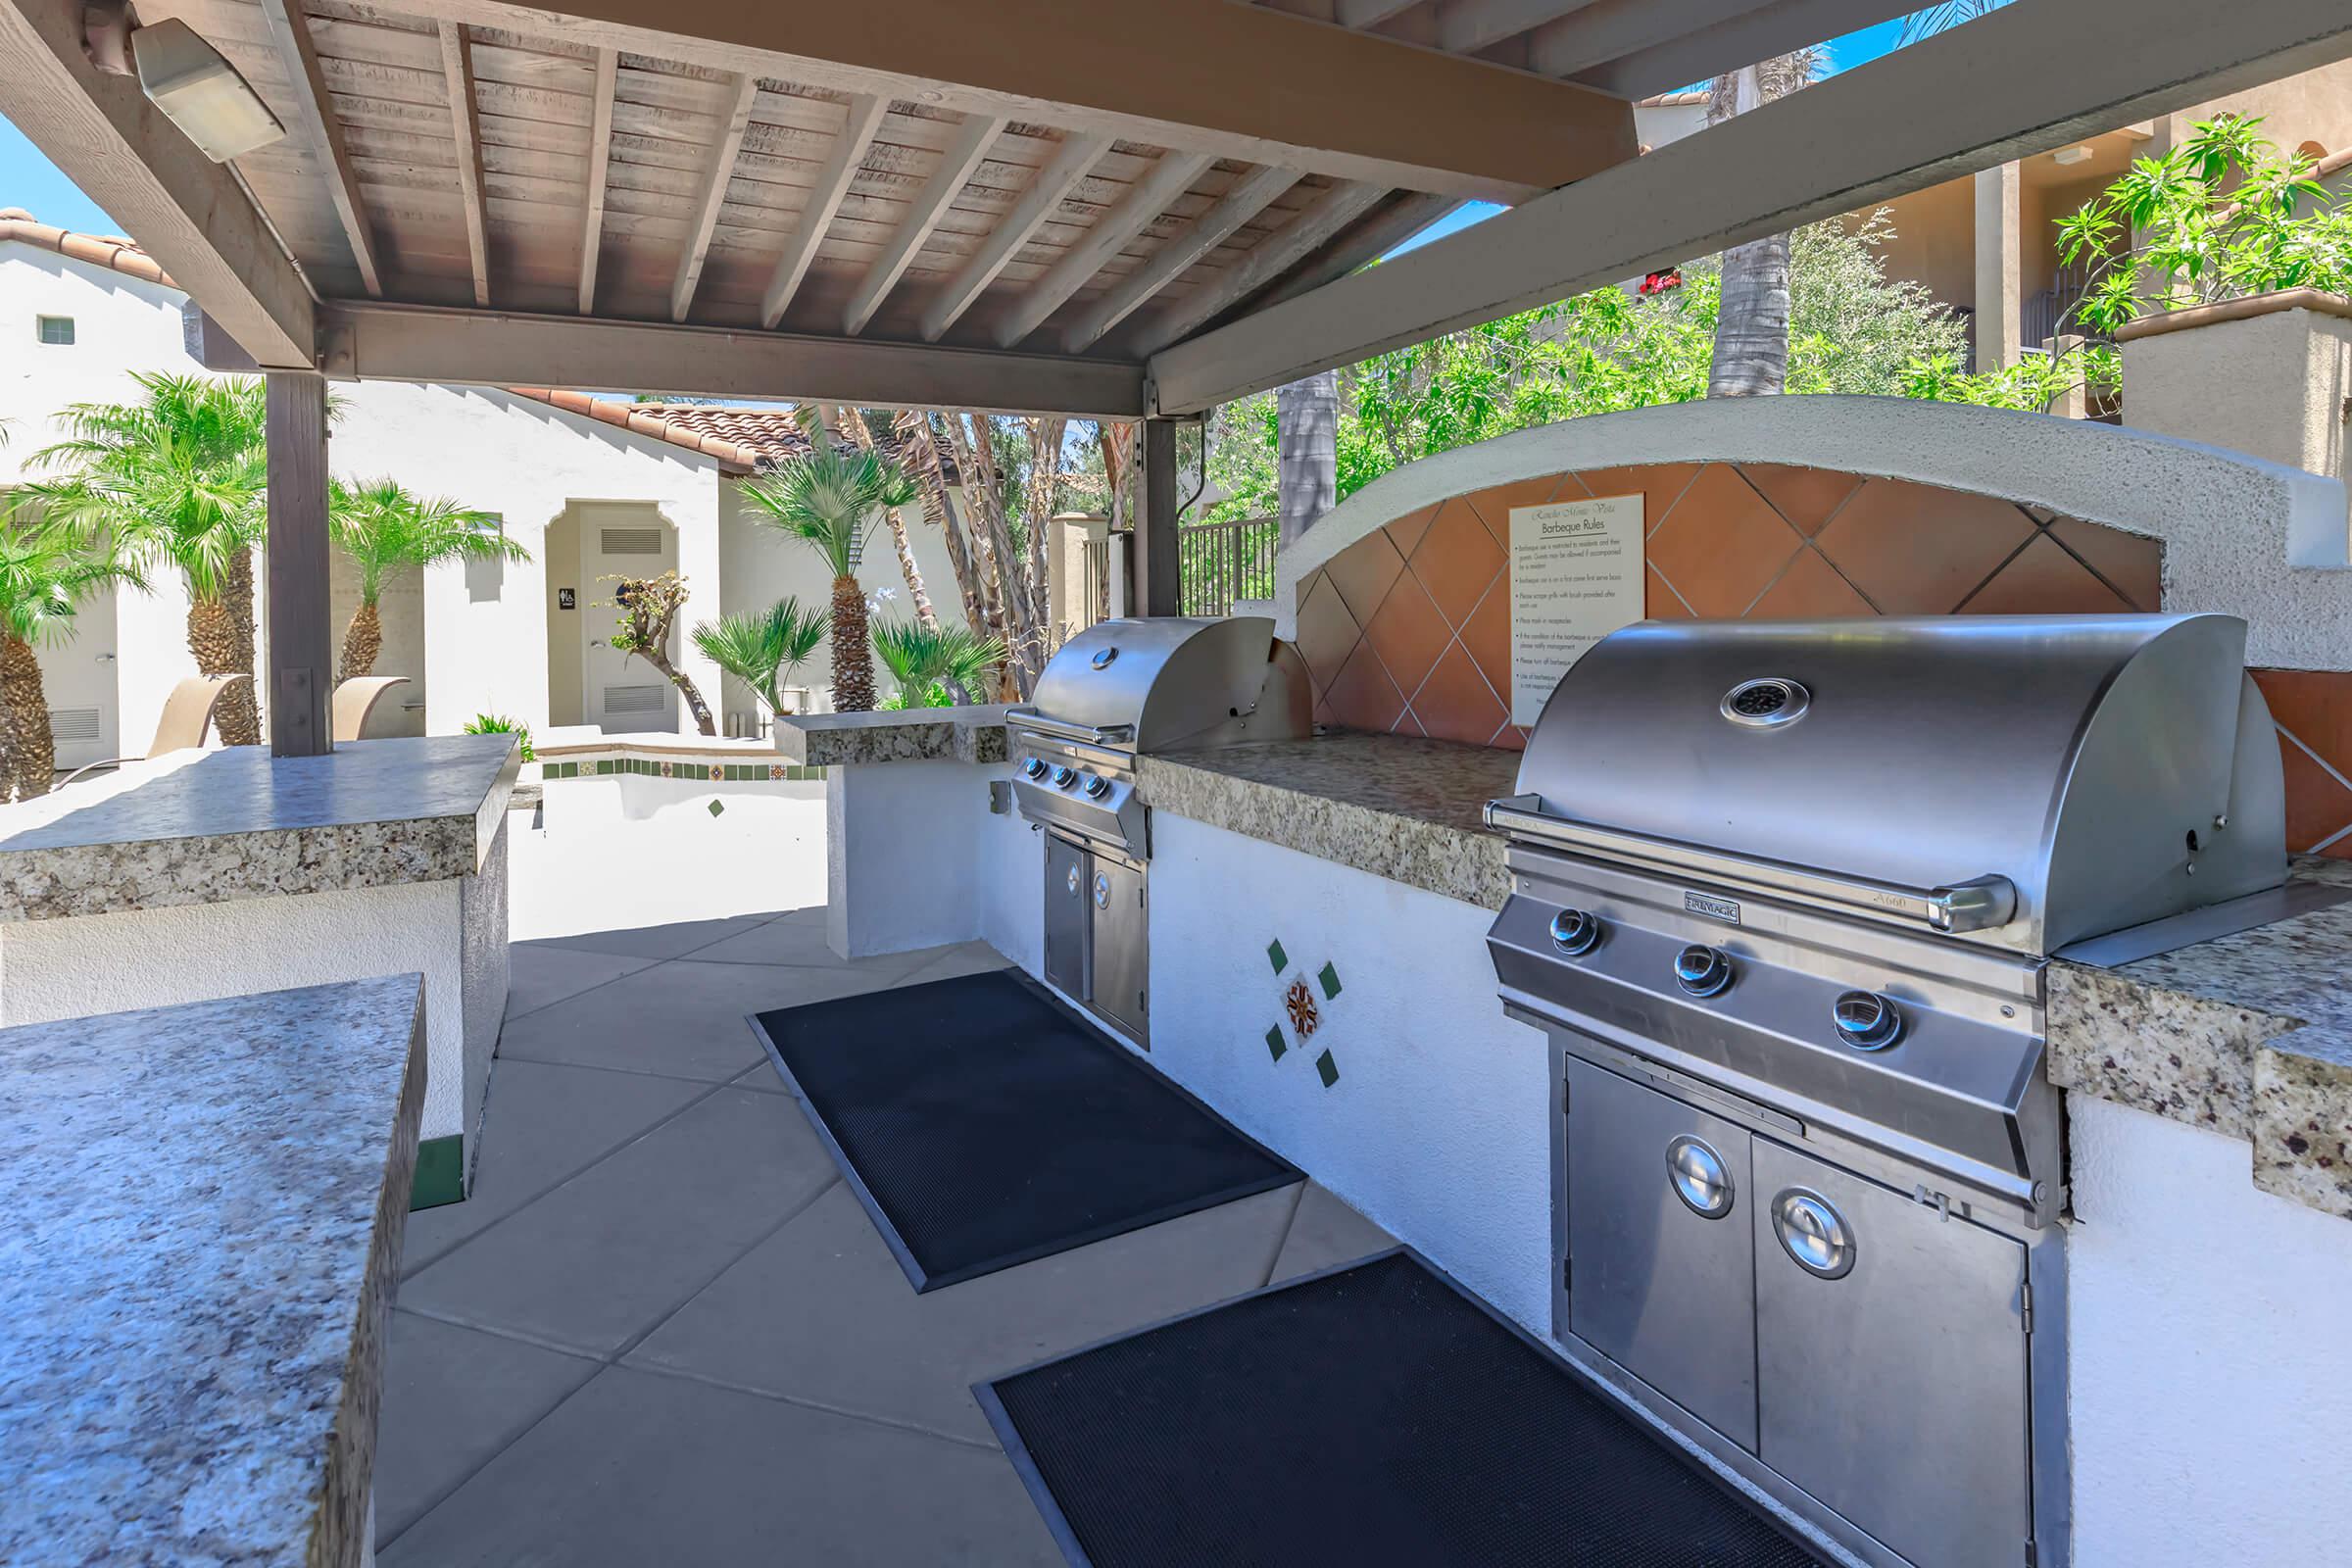 Stainless steel barbecues under a pavillion